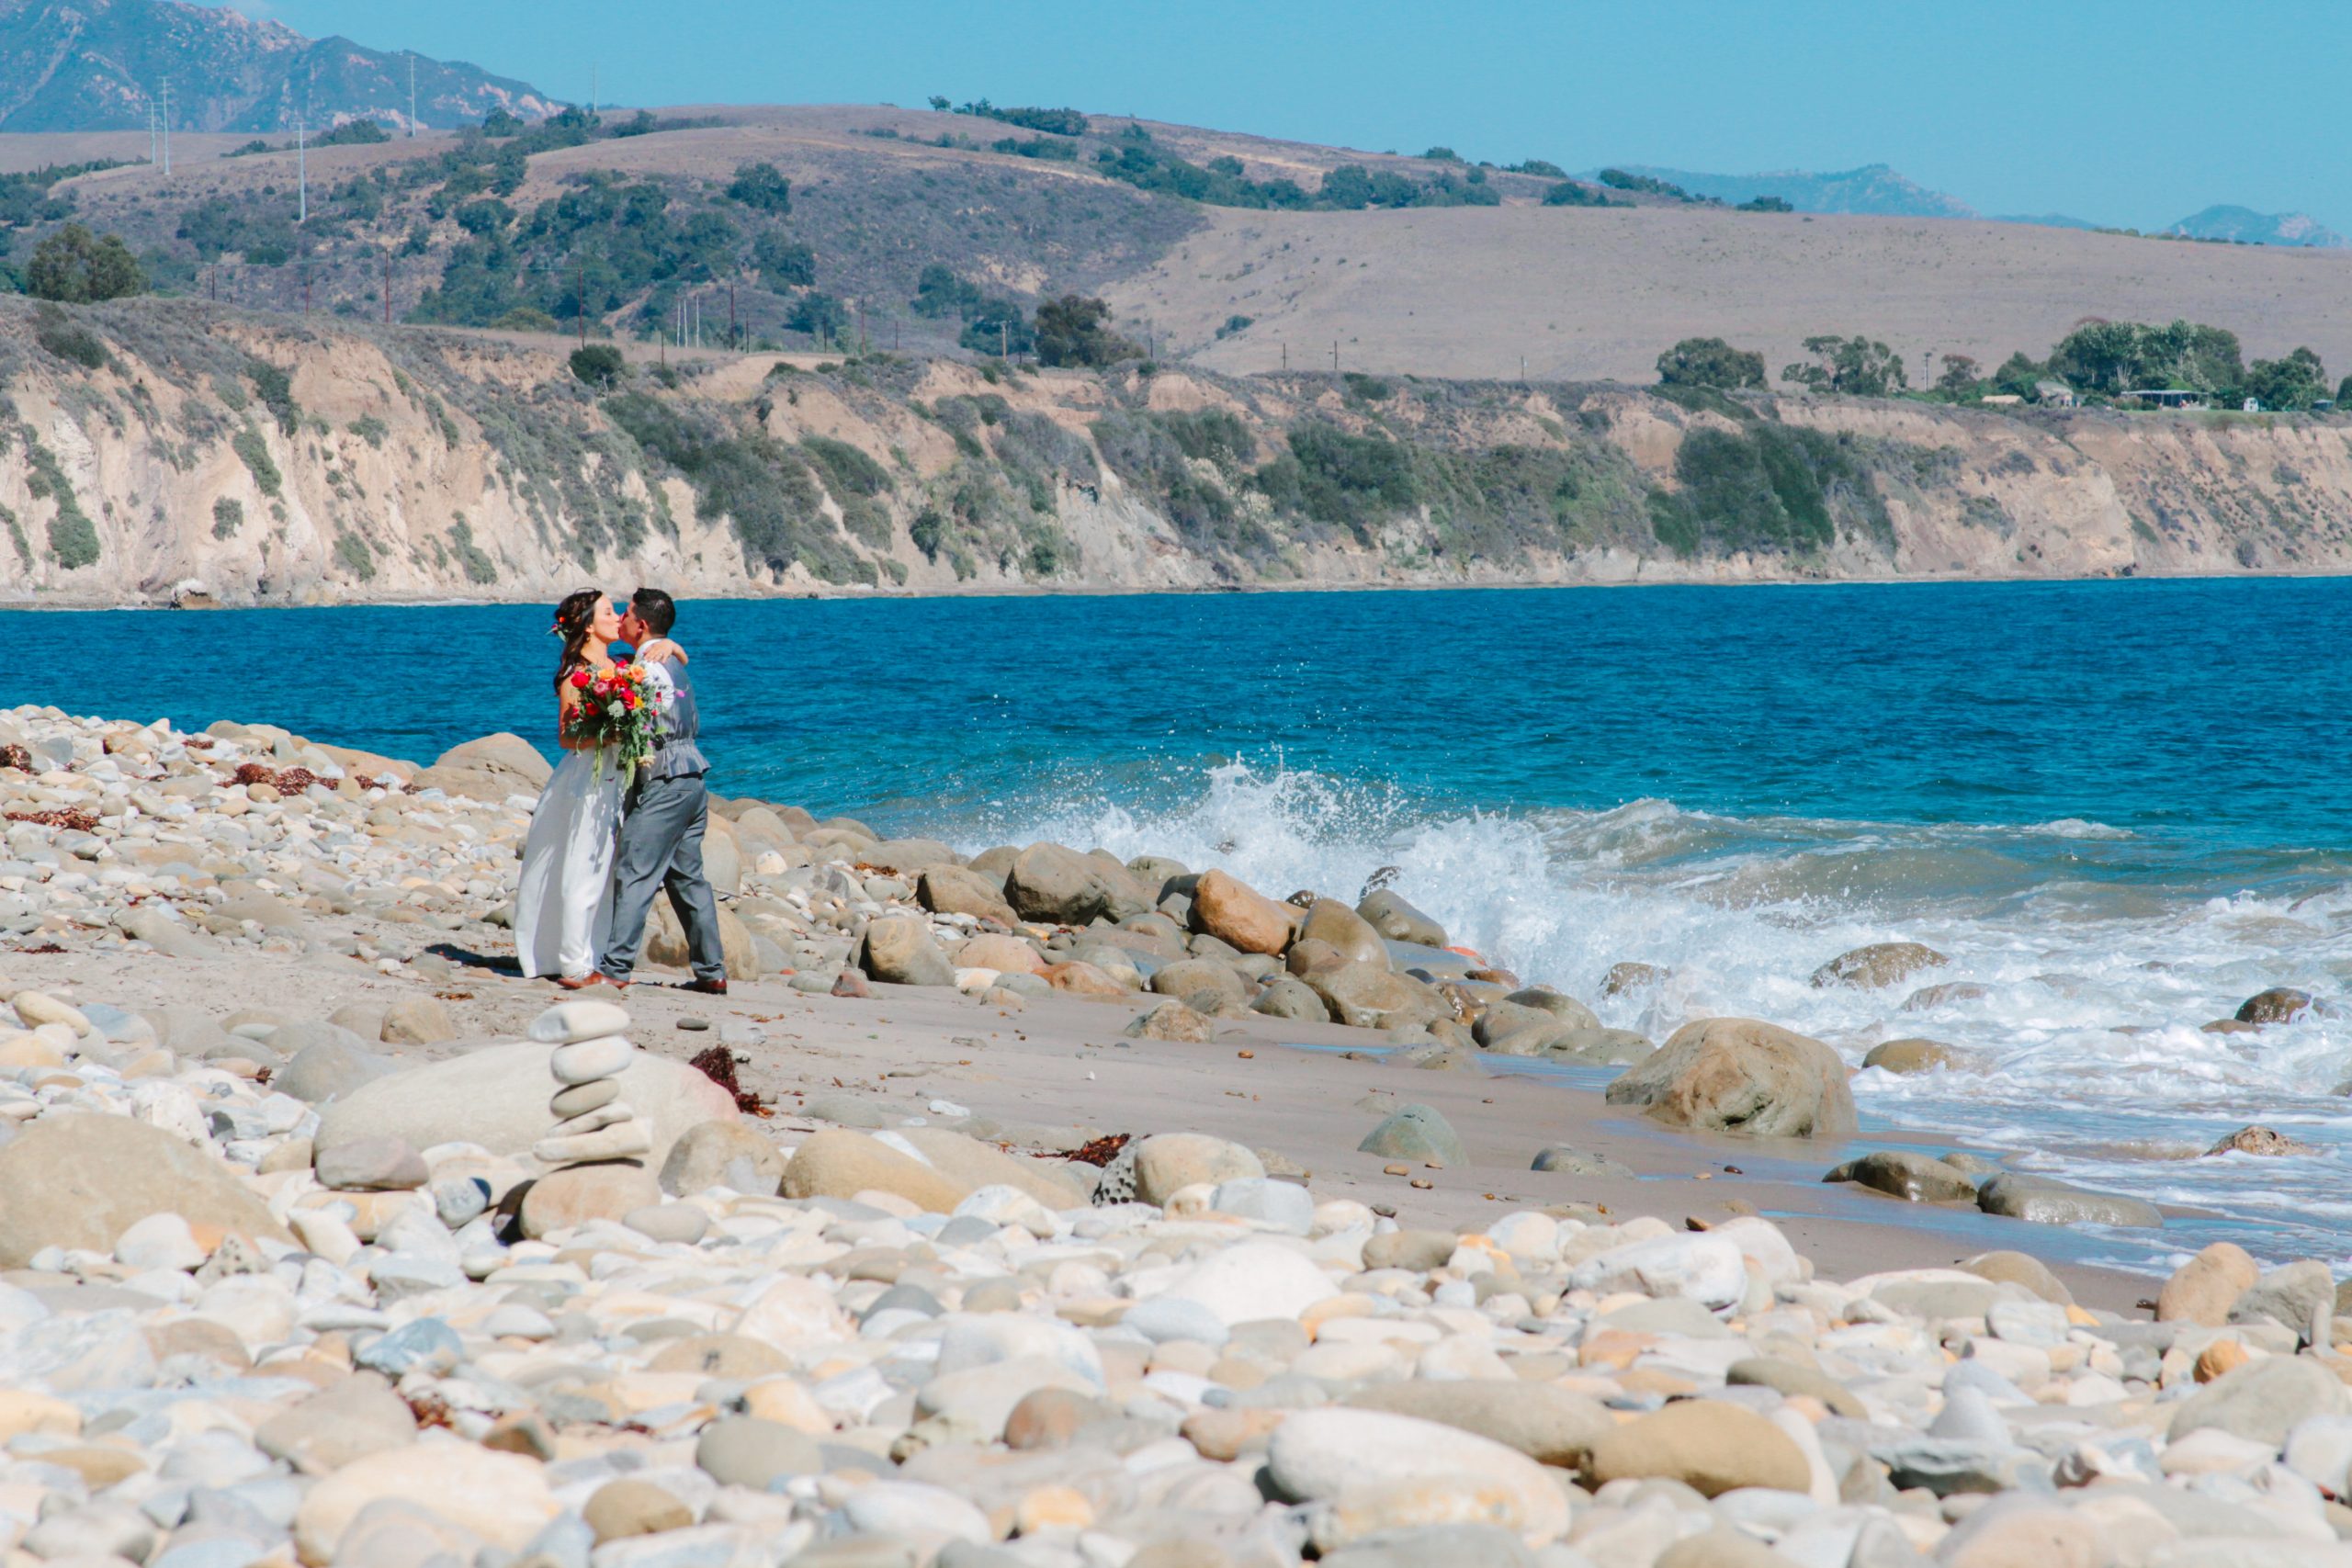 santa barbara wedding photographer colorful wedding at the beach bride and groom at the edge of the water